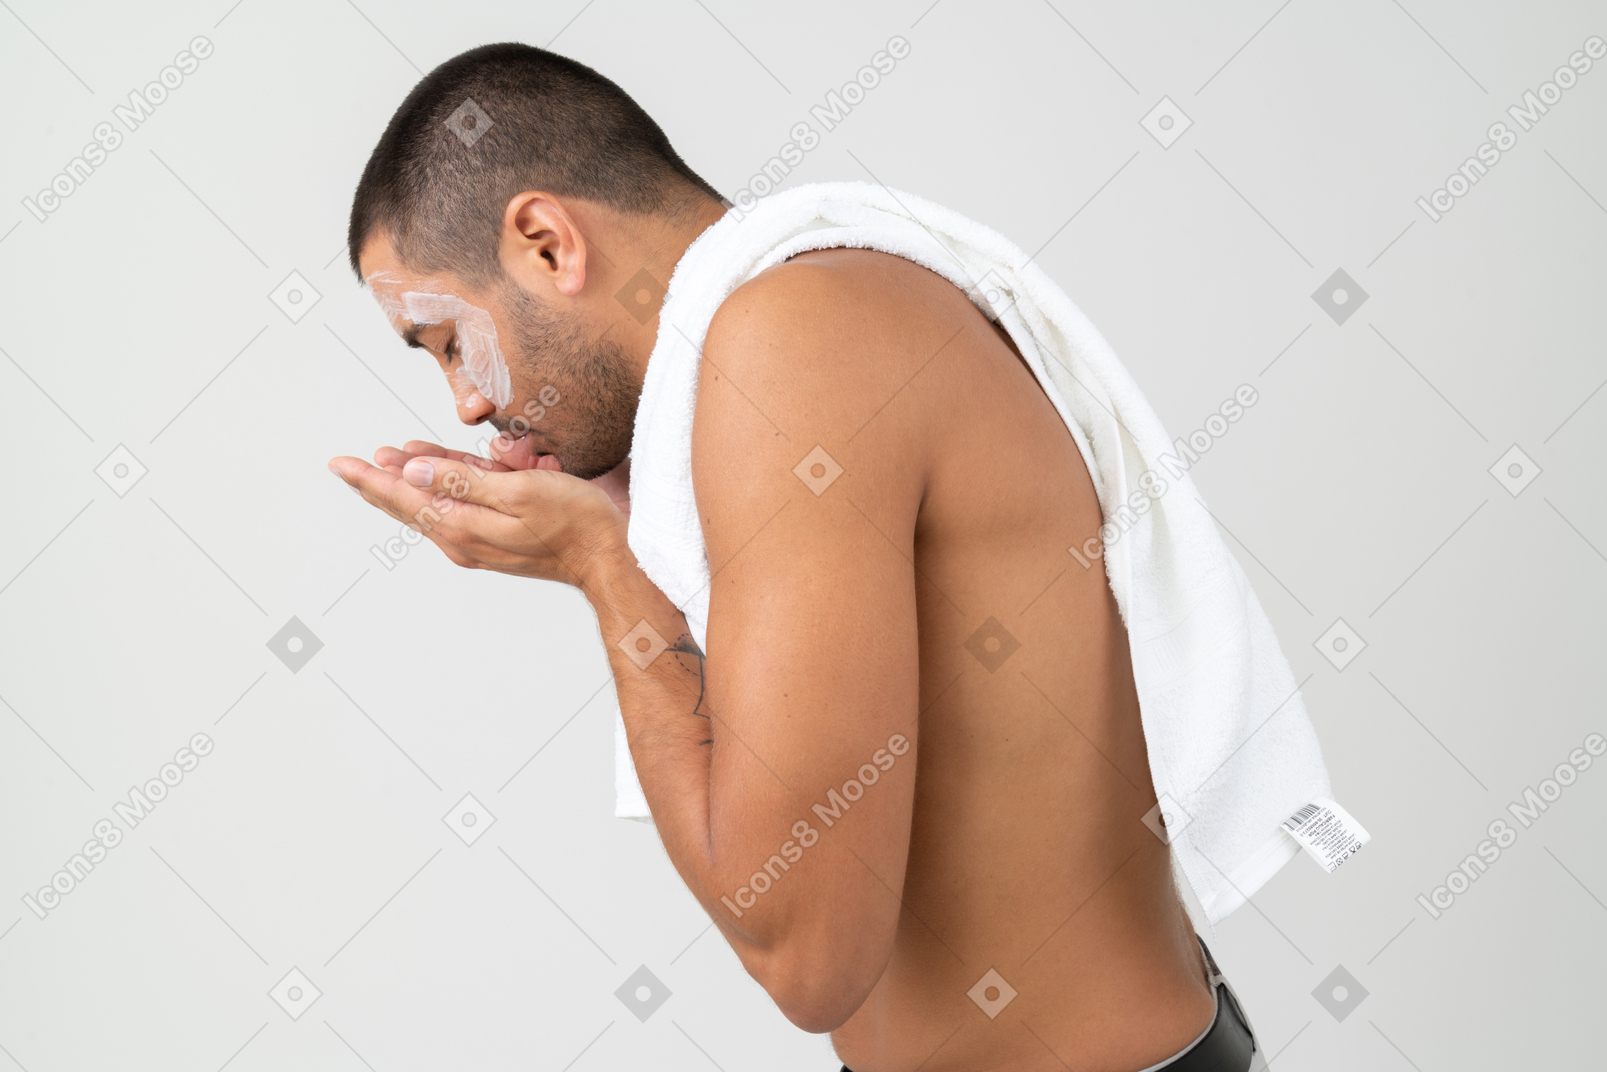 Man with towel on his shoulder washing off facial mask